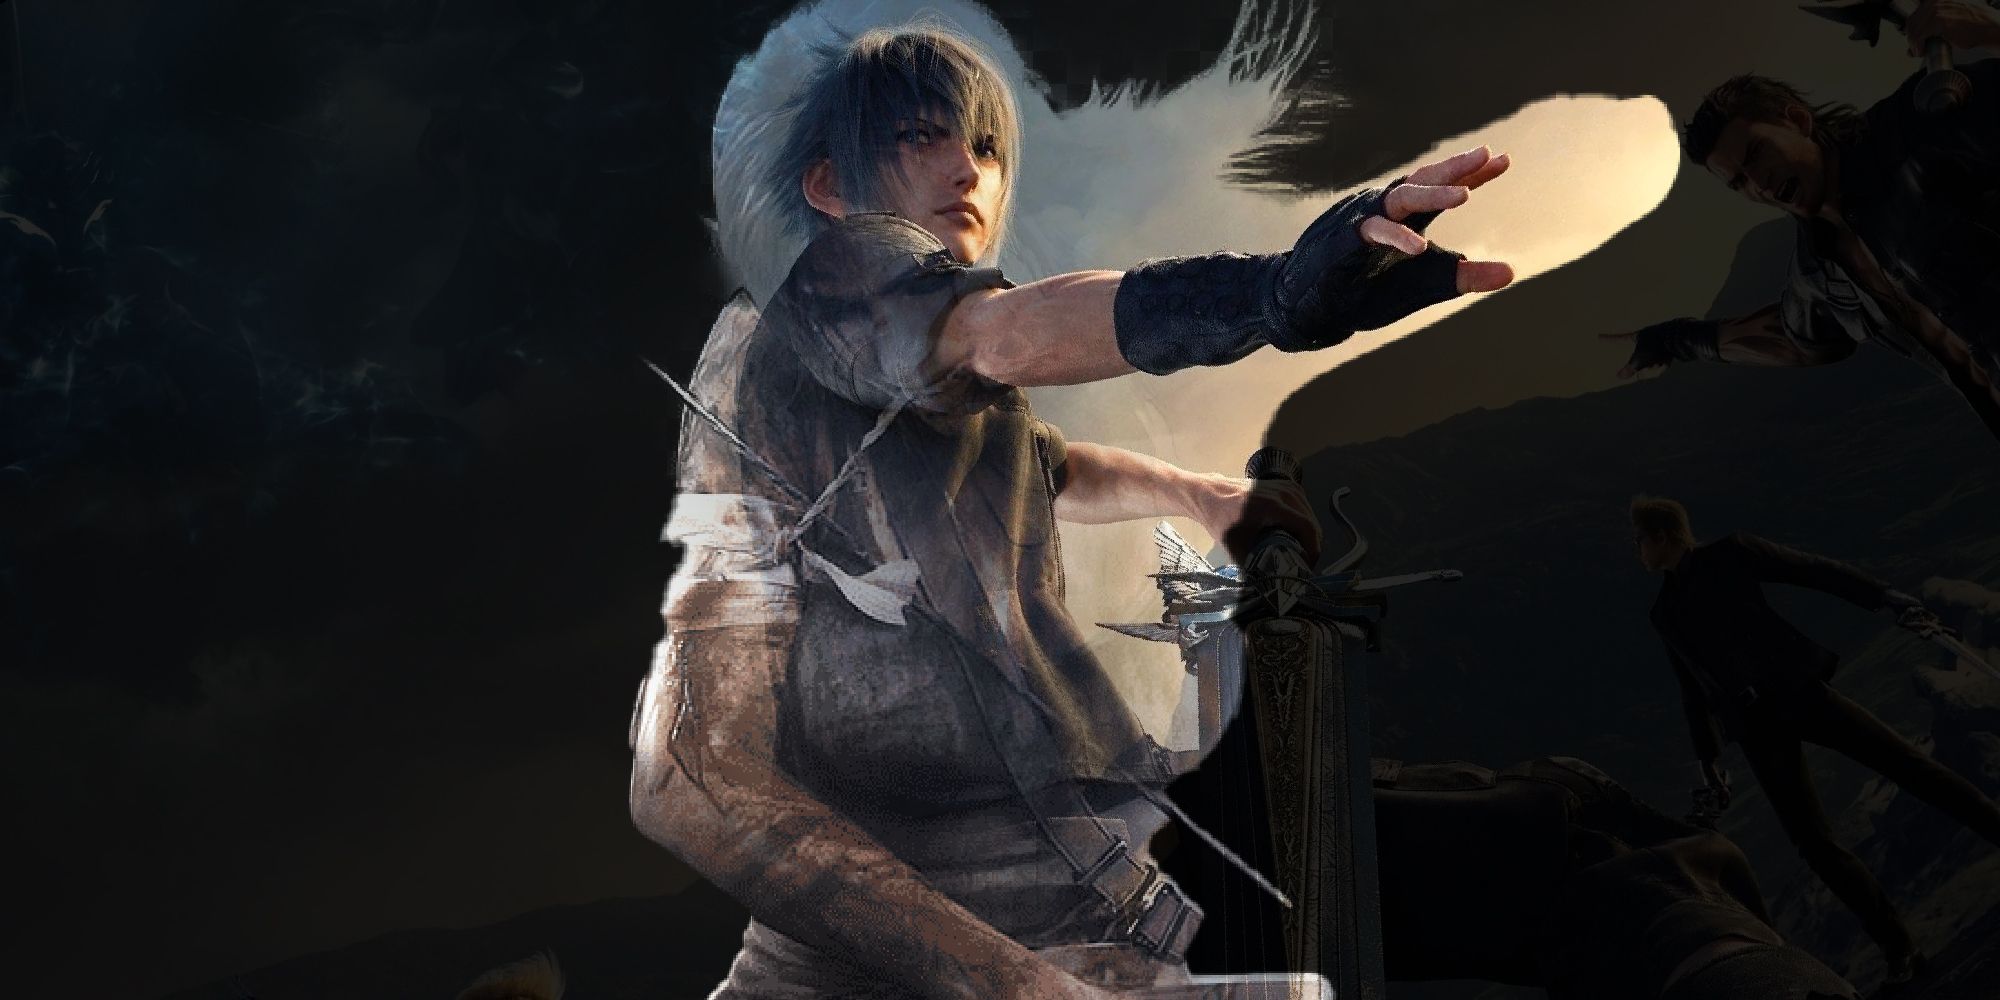 Eidos Montreal's Take On Final Fantasy 15 Could Have Been A Masterpiece